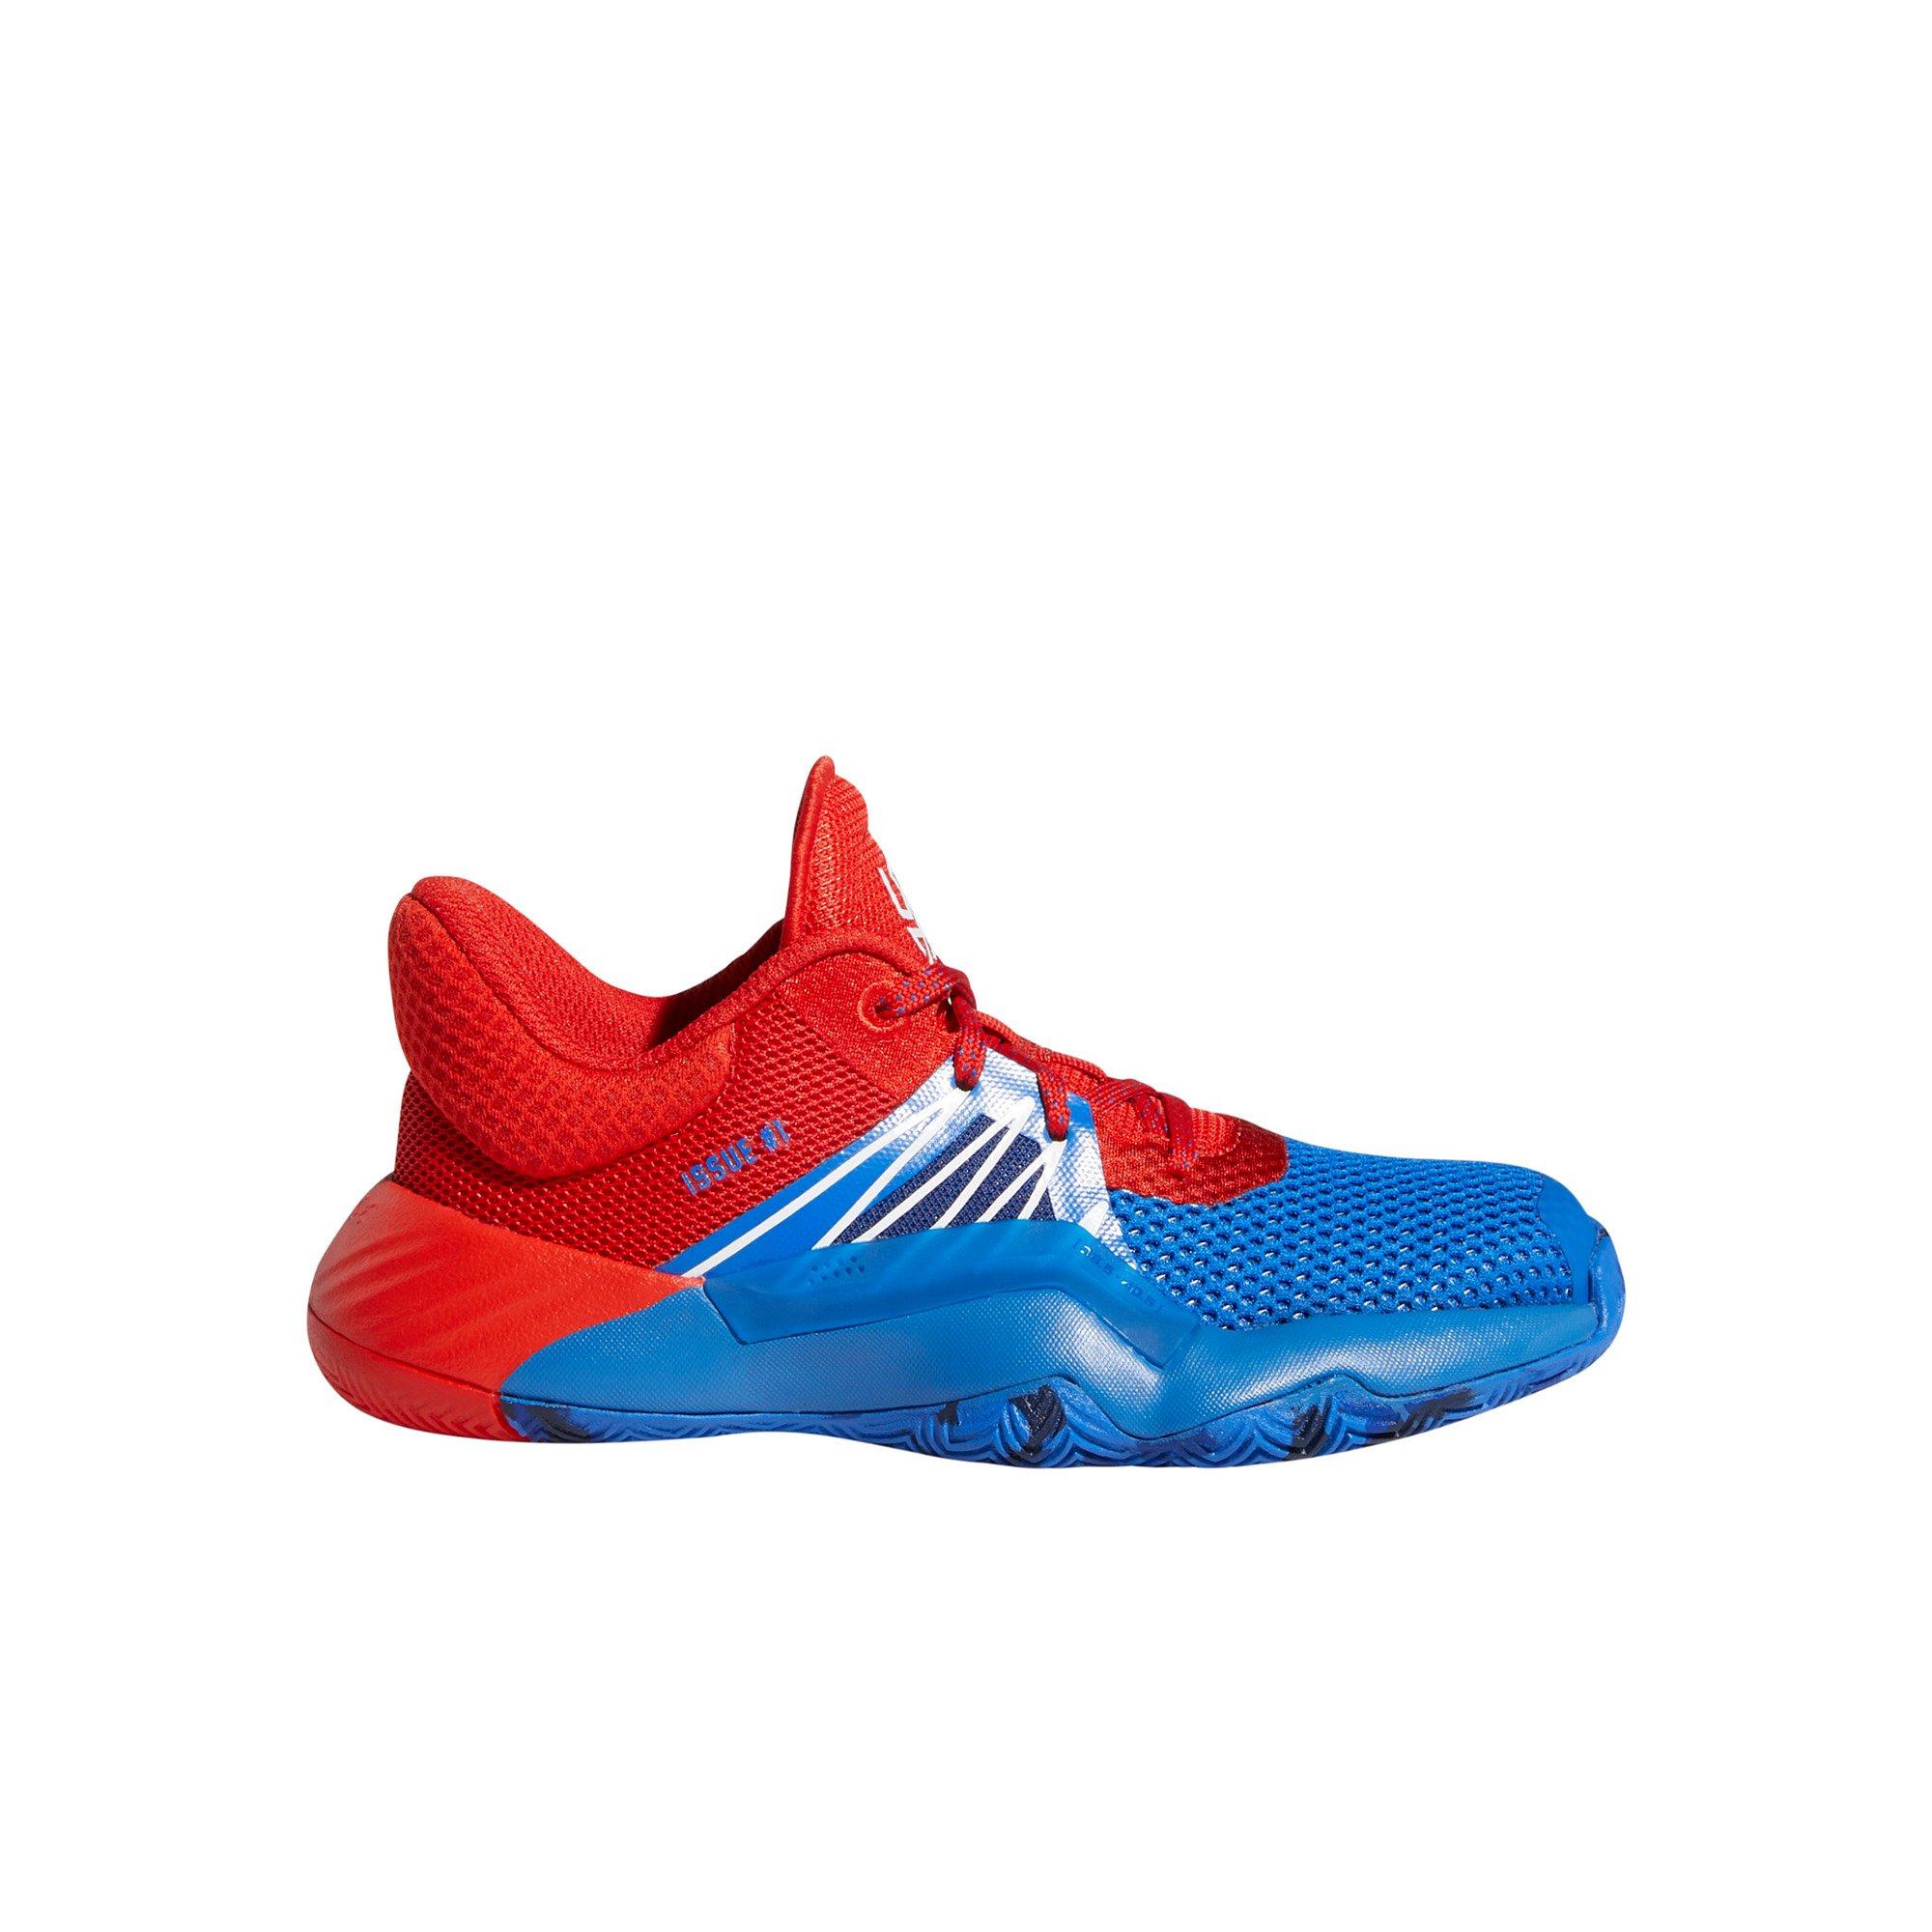 red basketball shoes for kids